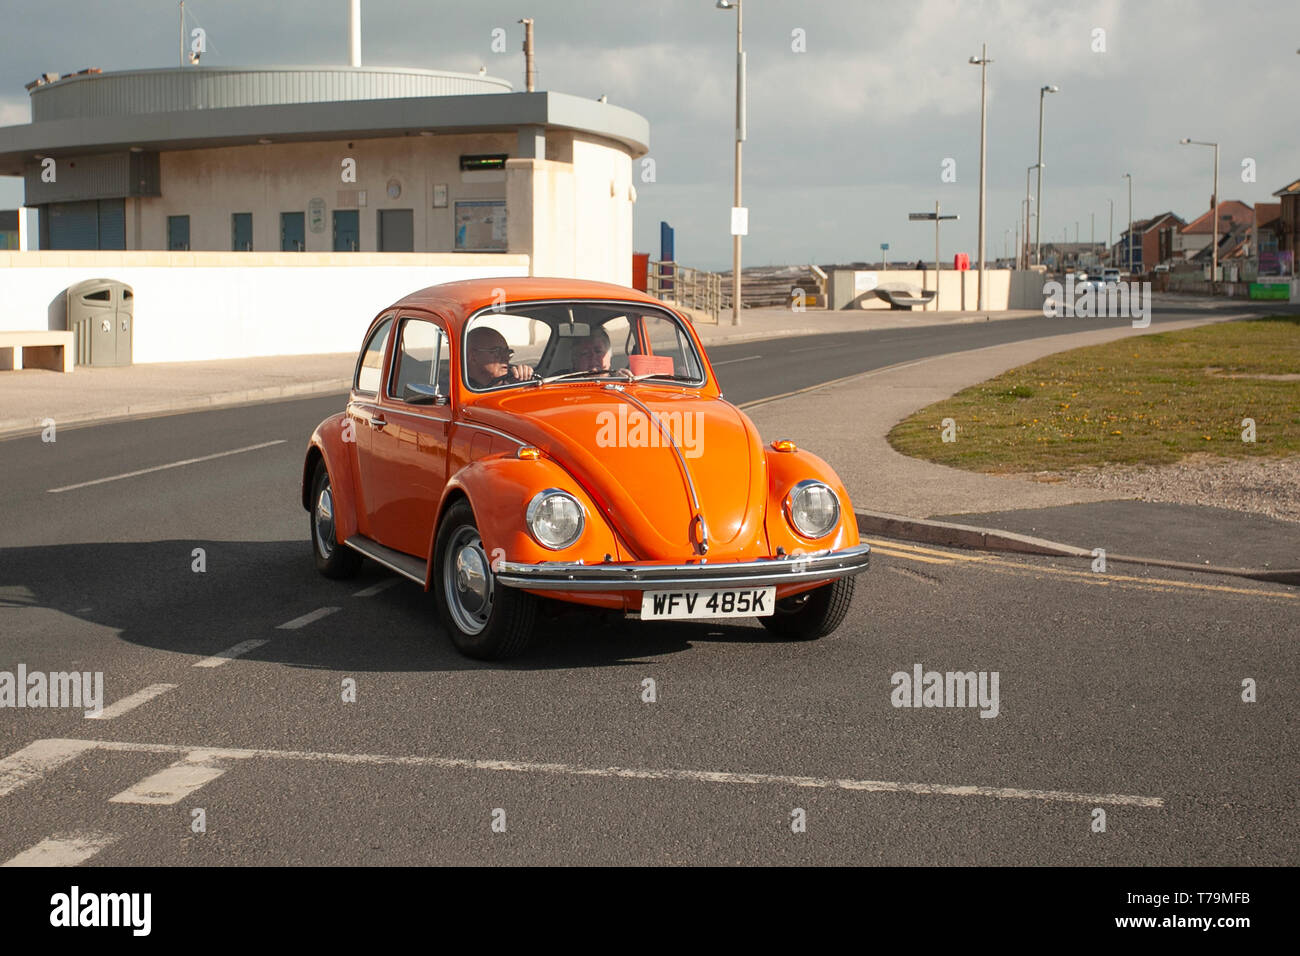 Orange 1972 70s 1300cc old style Type 1 VW Volkswagen 1300 Beetle; Classic cars at Cleveleys Spring Car Show at Jubilee Gardens in 2019. A show location for veteran, retro collectible, restored, cherished old timers, heritage event, vintage, automobile vehicle show by Blackpool Vehicle Preservation Group (BVPG). Stock Photo